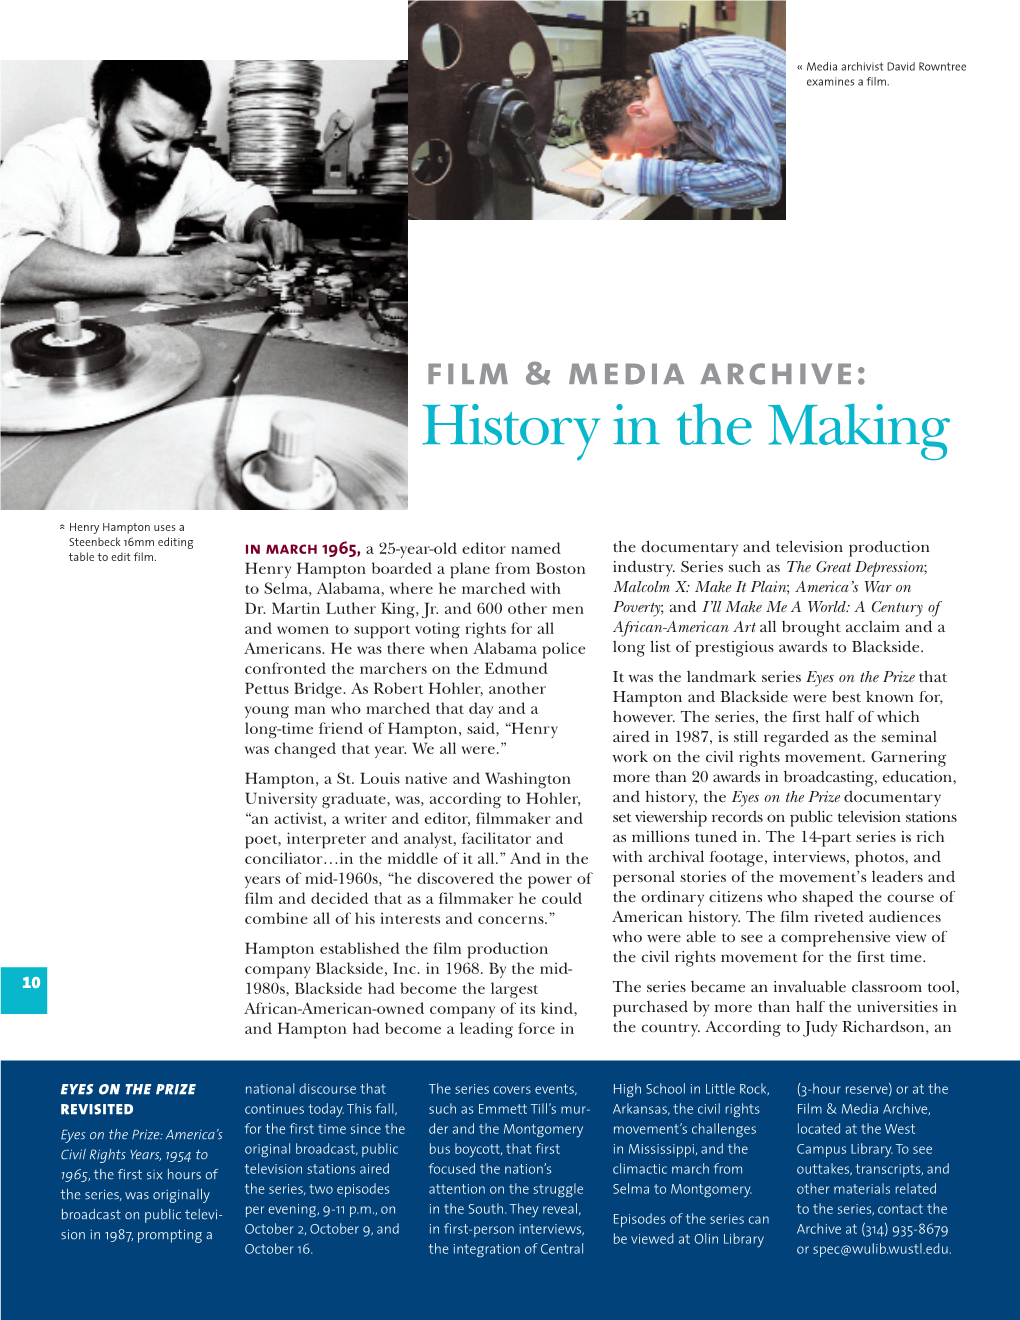 Film & Media Archive: History in the Making